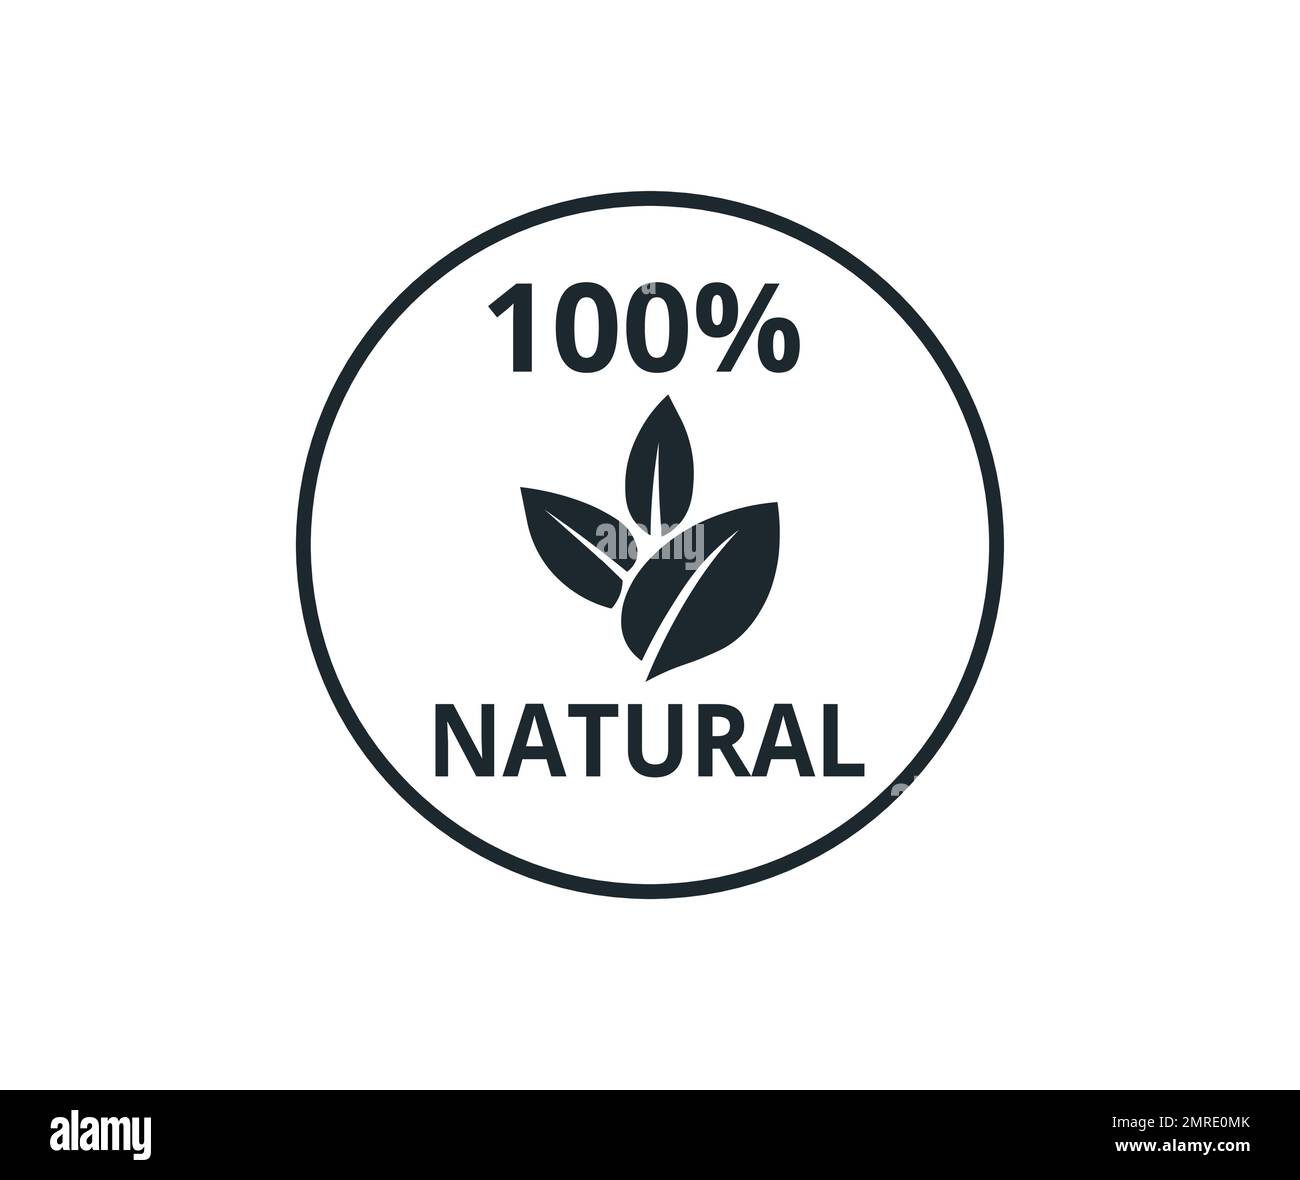 Isolated natural one hundred percent symbol. Concept of packaging and regulations. Stock Vector